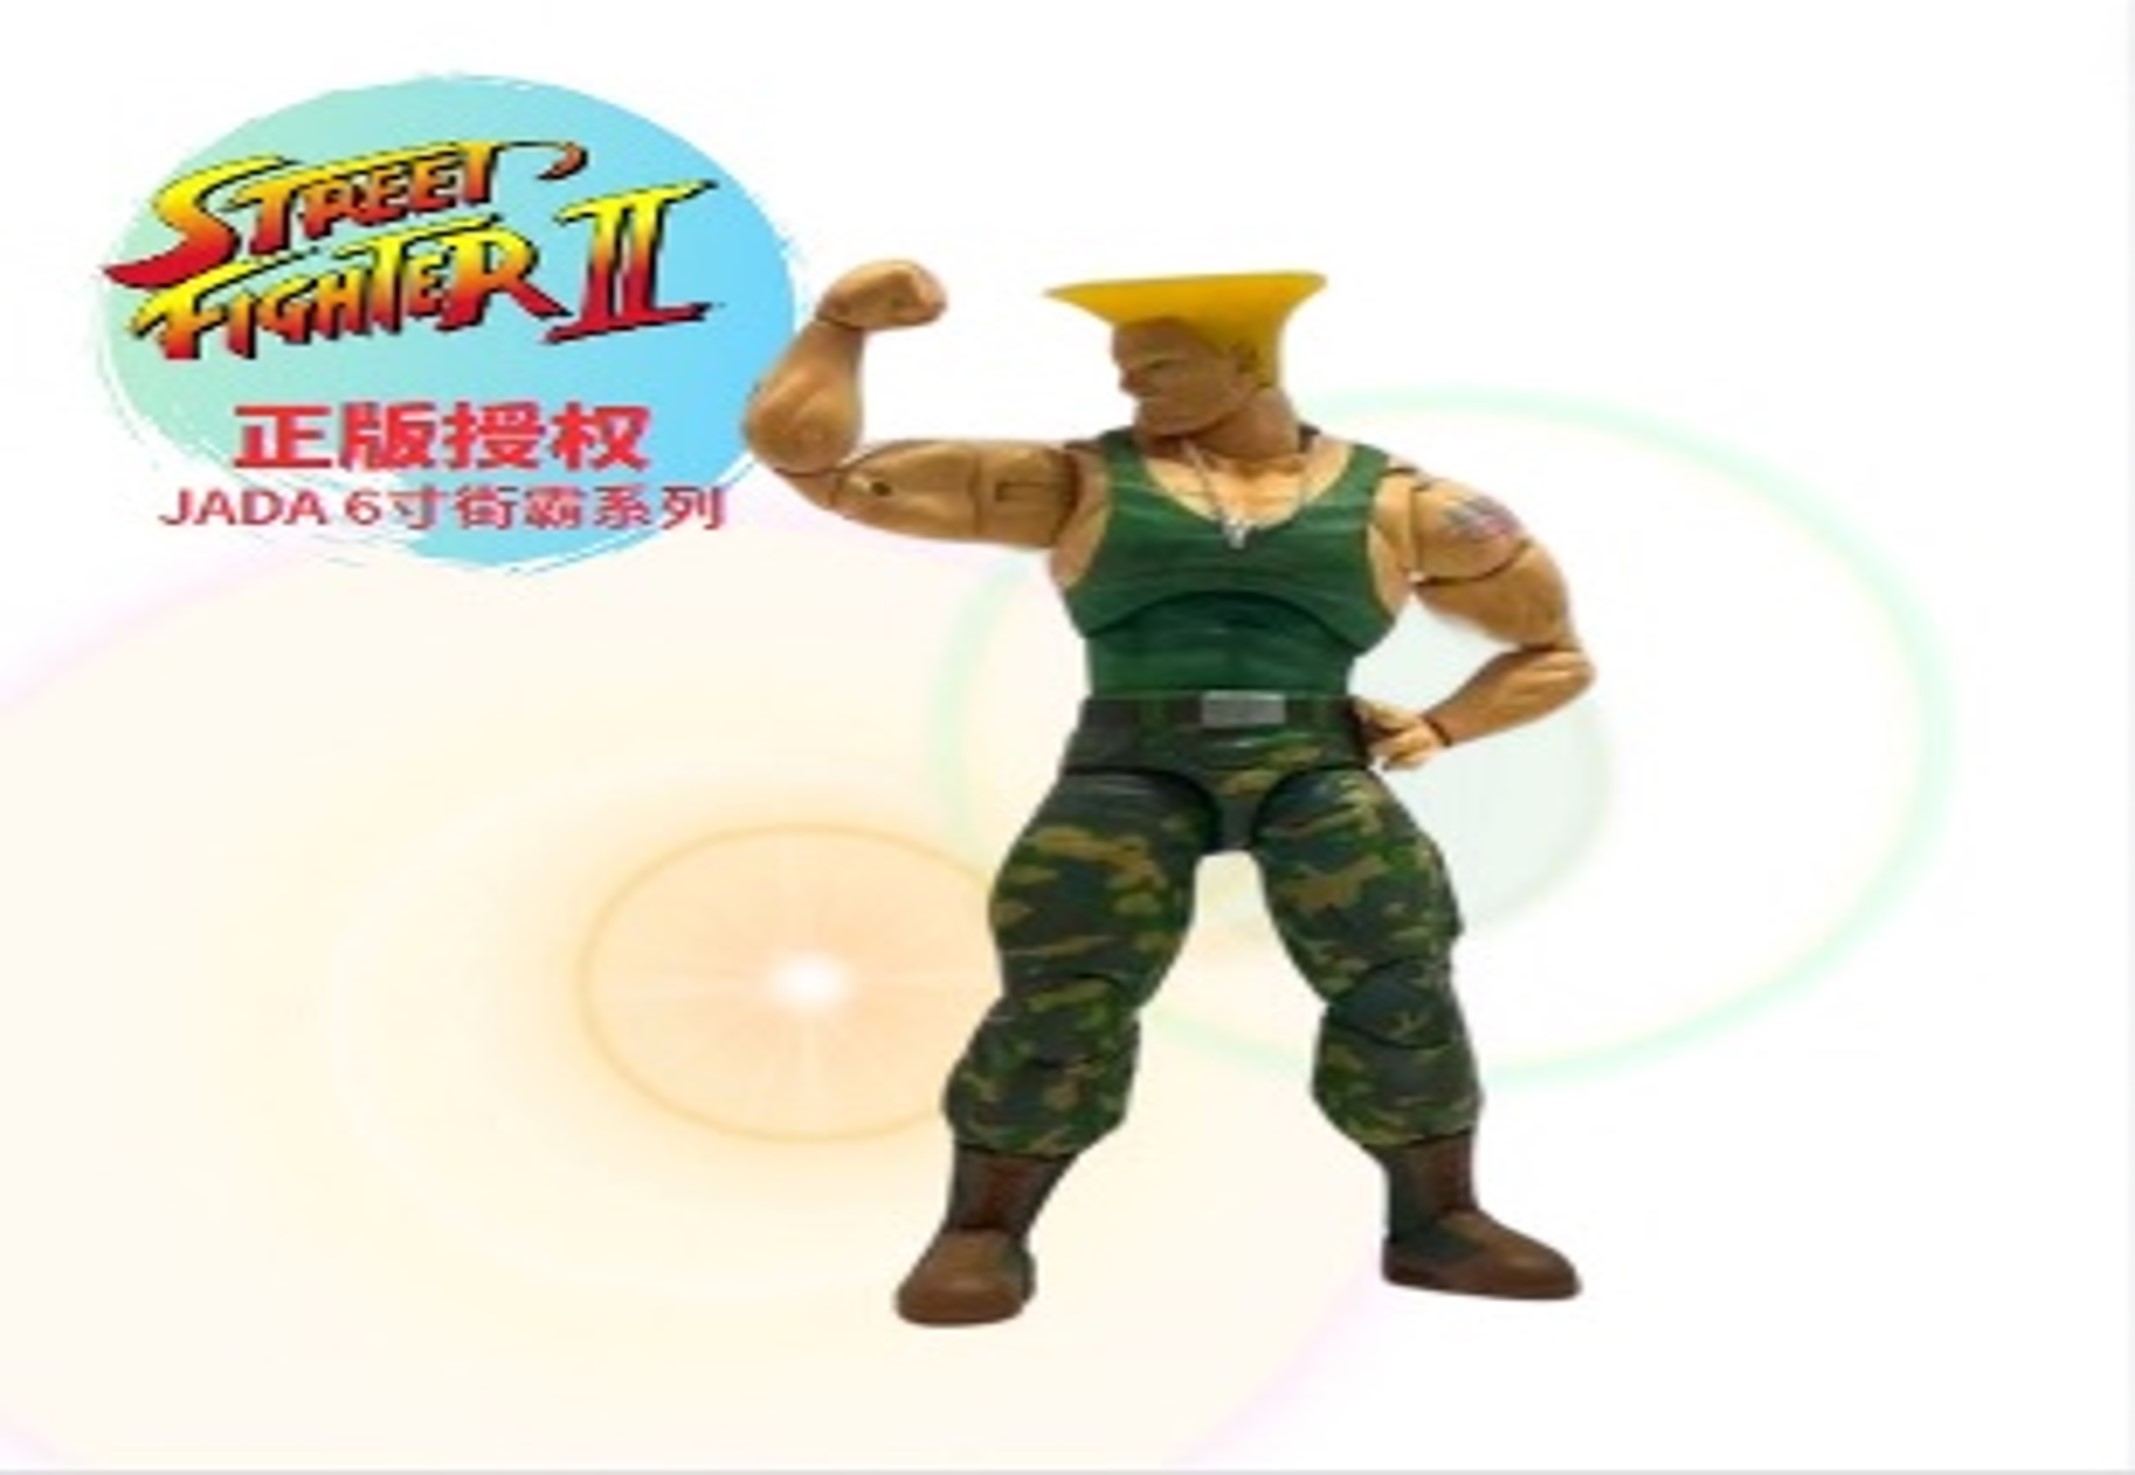 Ultra Street Fighter II Guile 6-Inch Action Figure画像